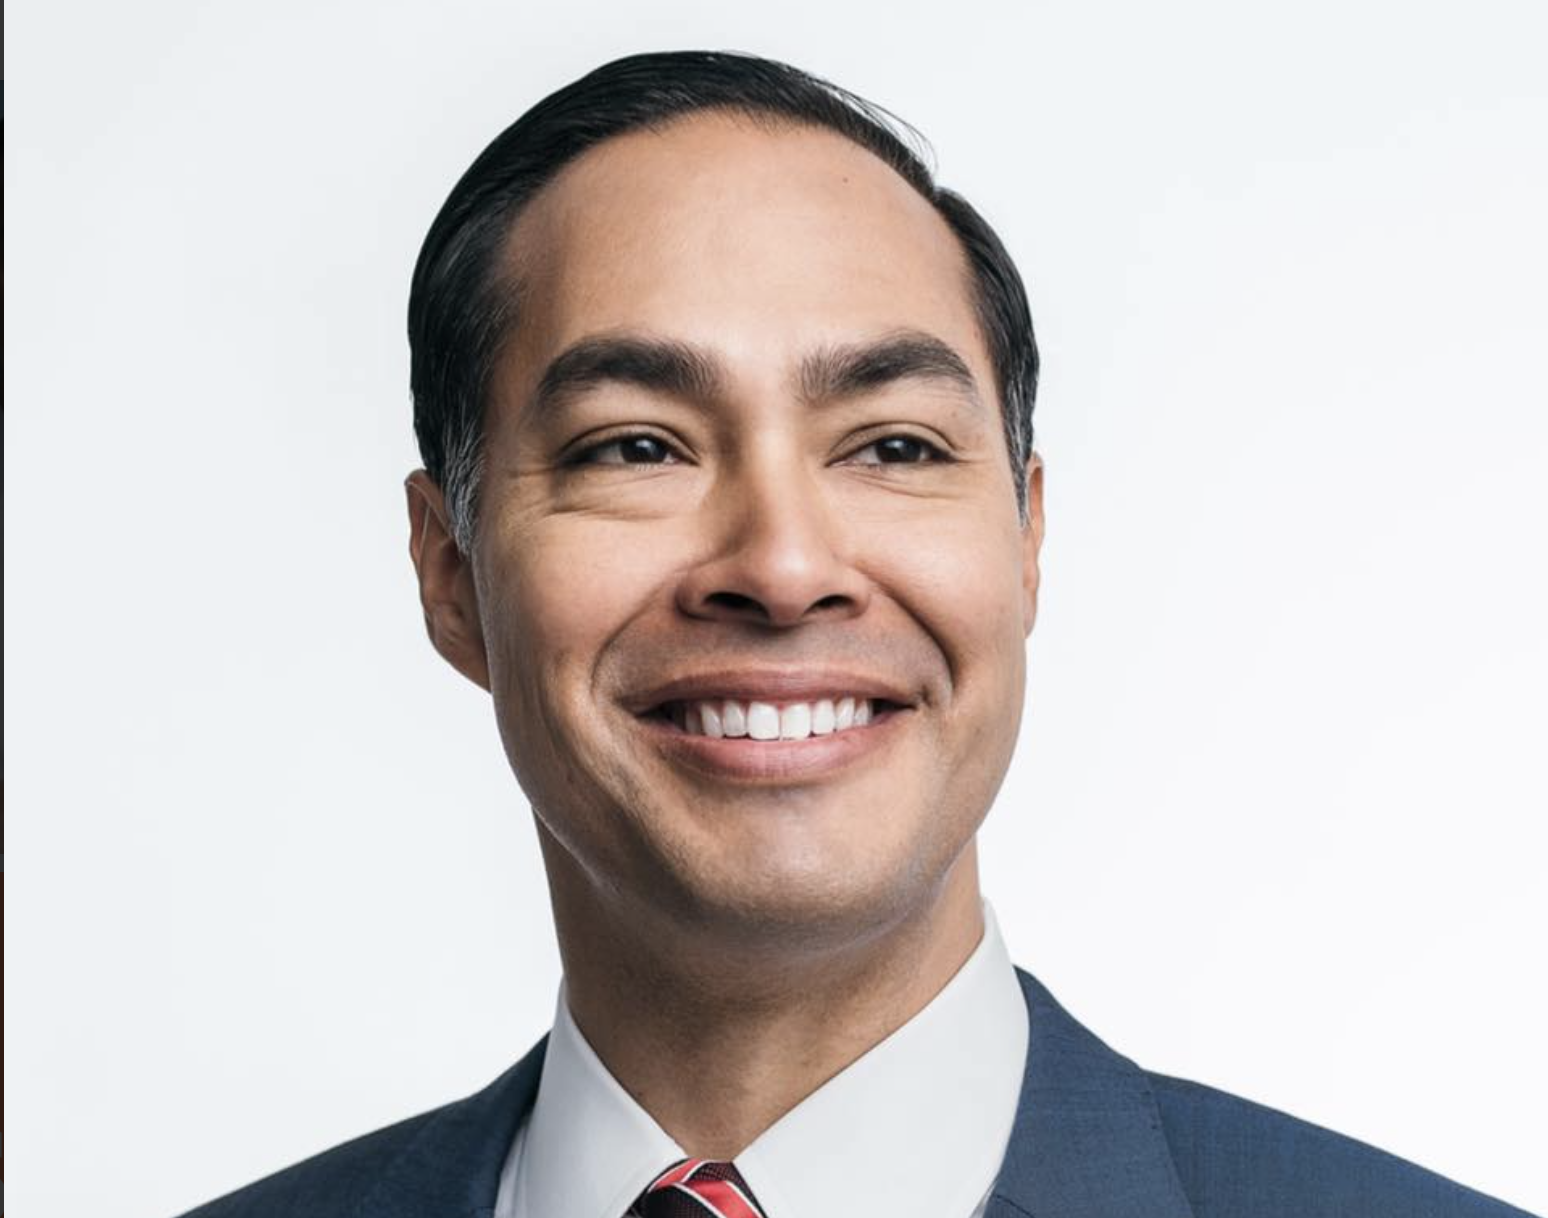 Joaquin Castro Named Impeachment Manager Ahead of Proceedings